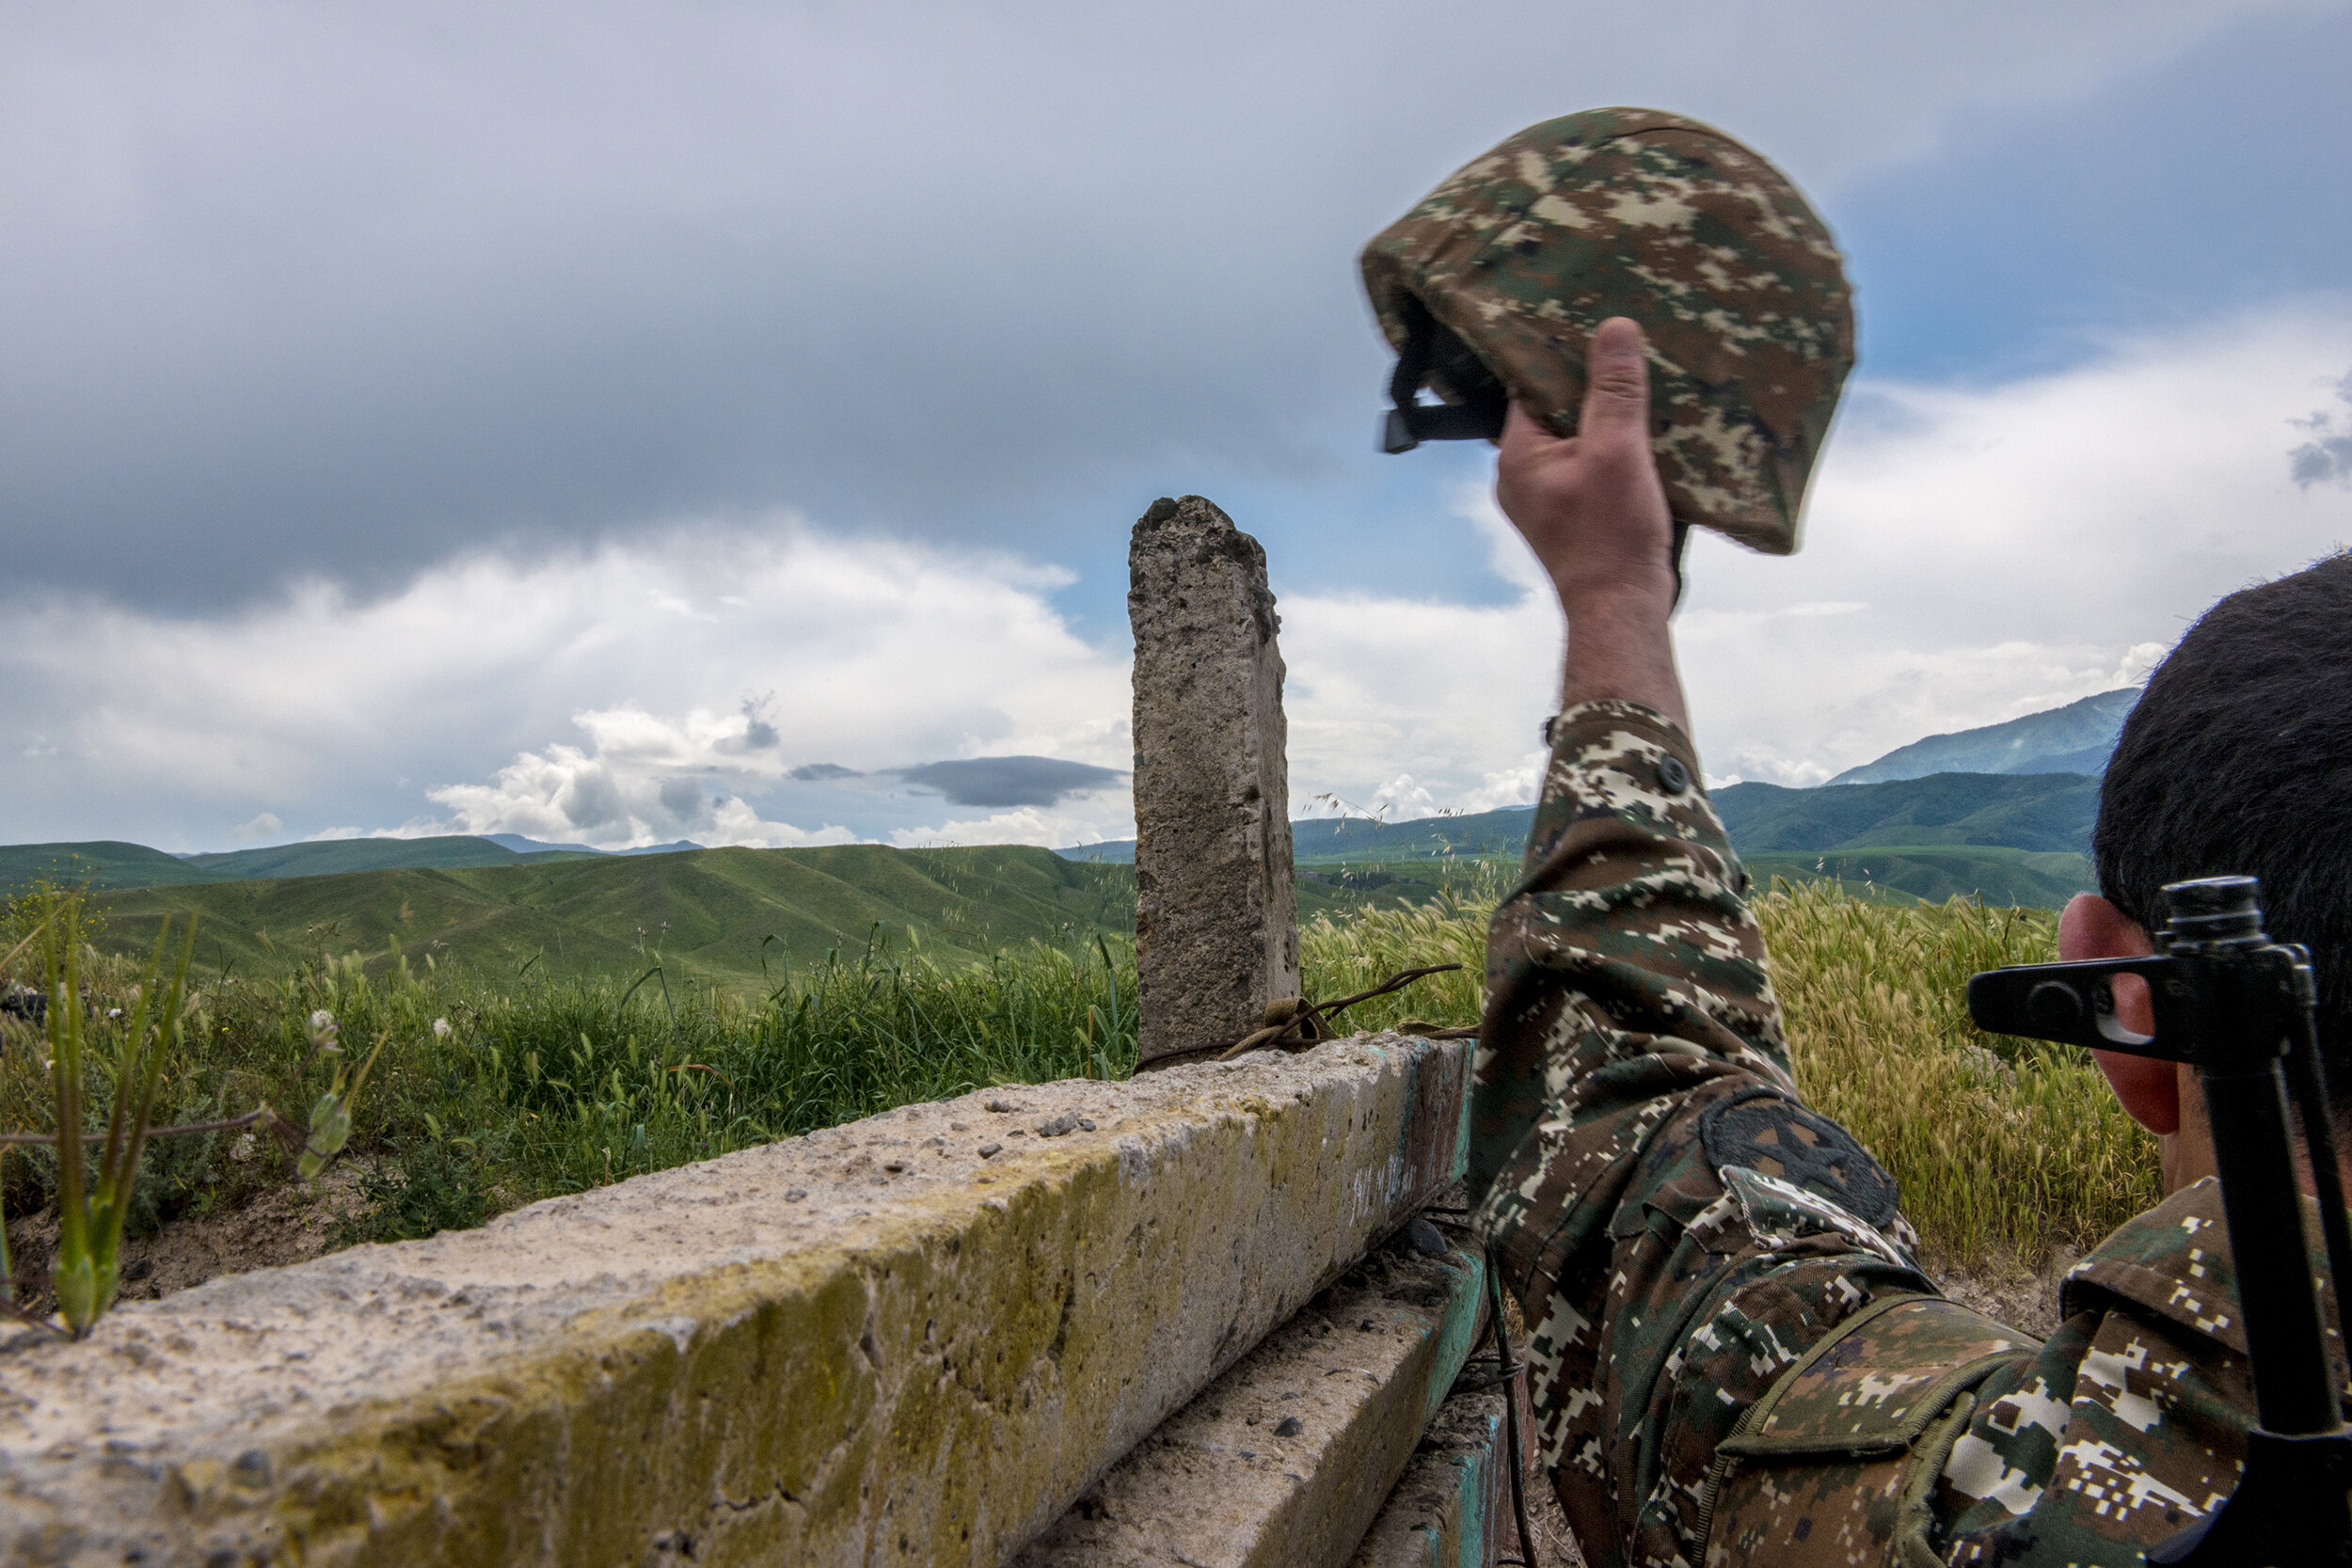  An NKR soldier lifts his helmet while facing a disputed landscape.  Estimates put the total number of troops facing off on the Line of Contact at 40,000, making the NKR-Azerbaijan border among the most militarized in the world. 